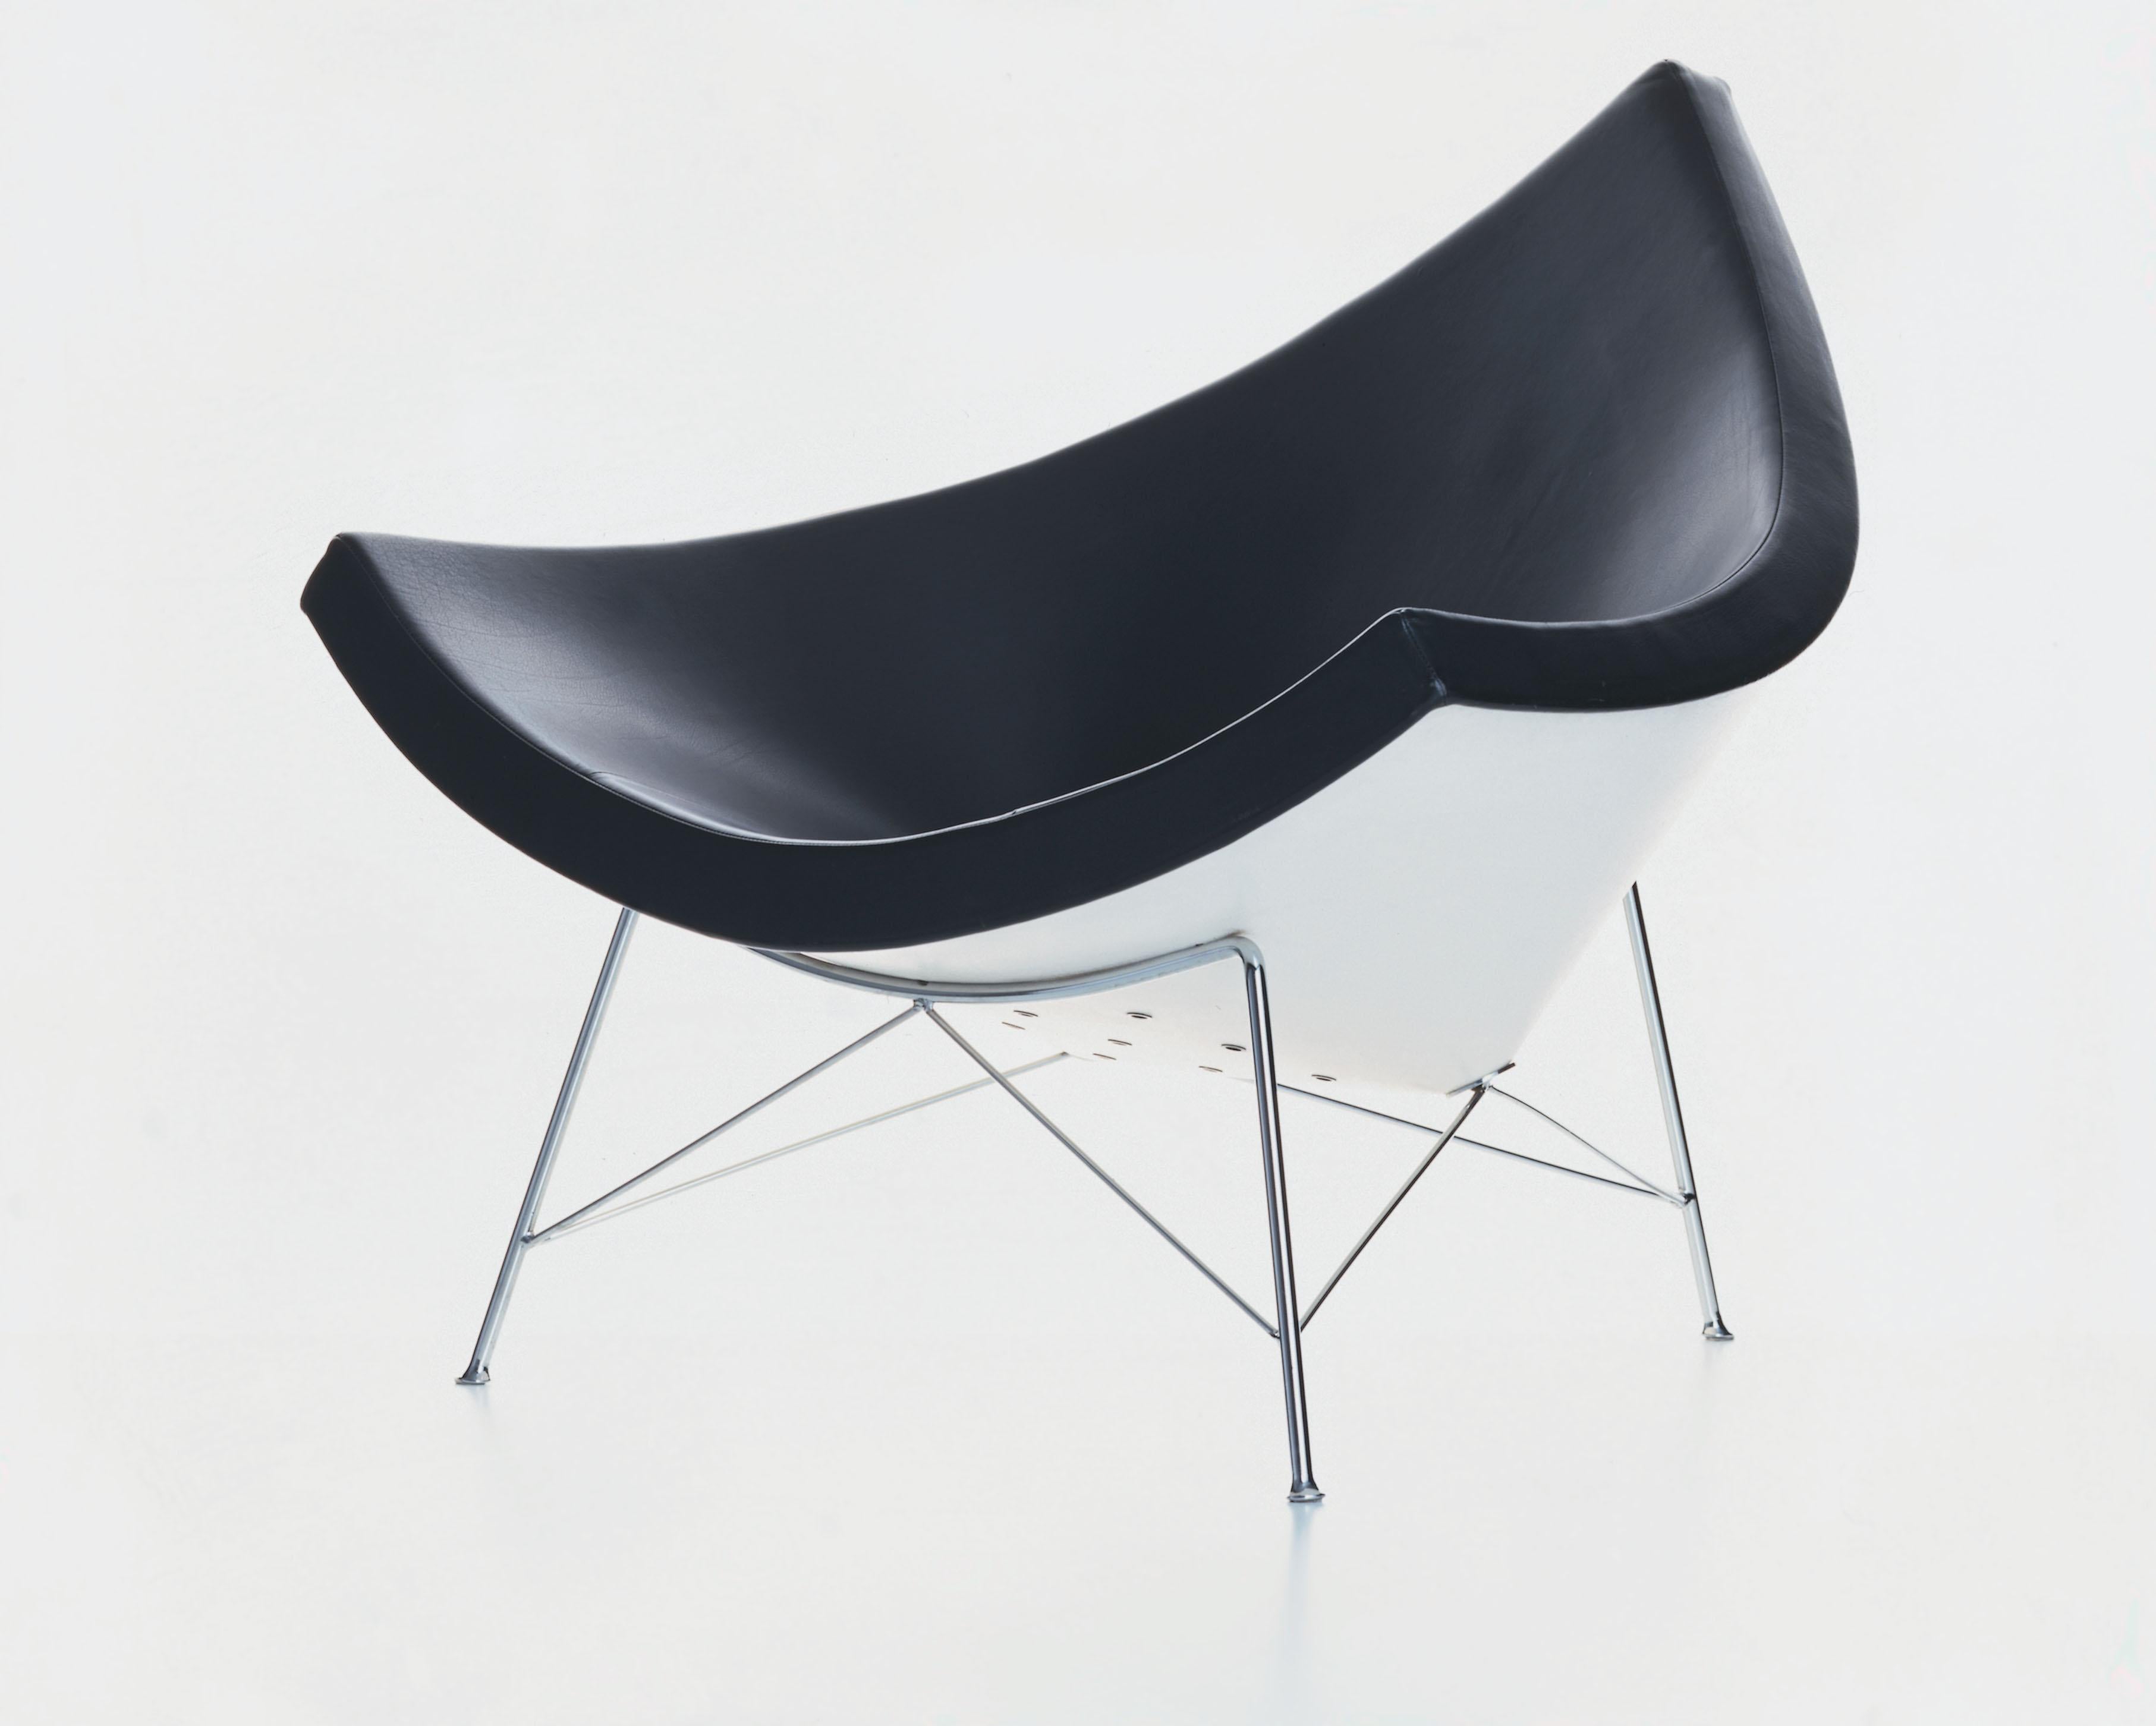 Swiss Vitra Miniature Coconut Chair in Black with Chrome Legs by George Nelson For Sale